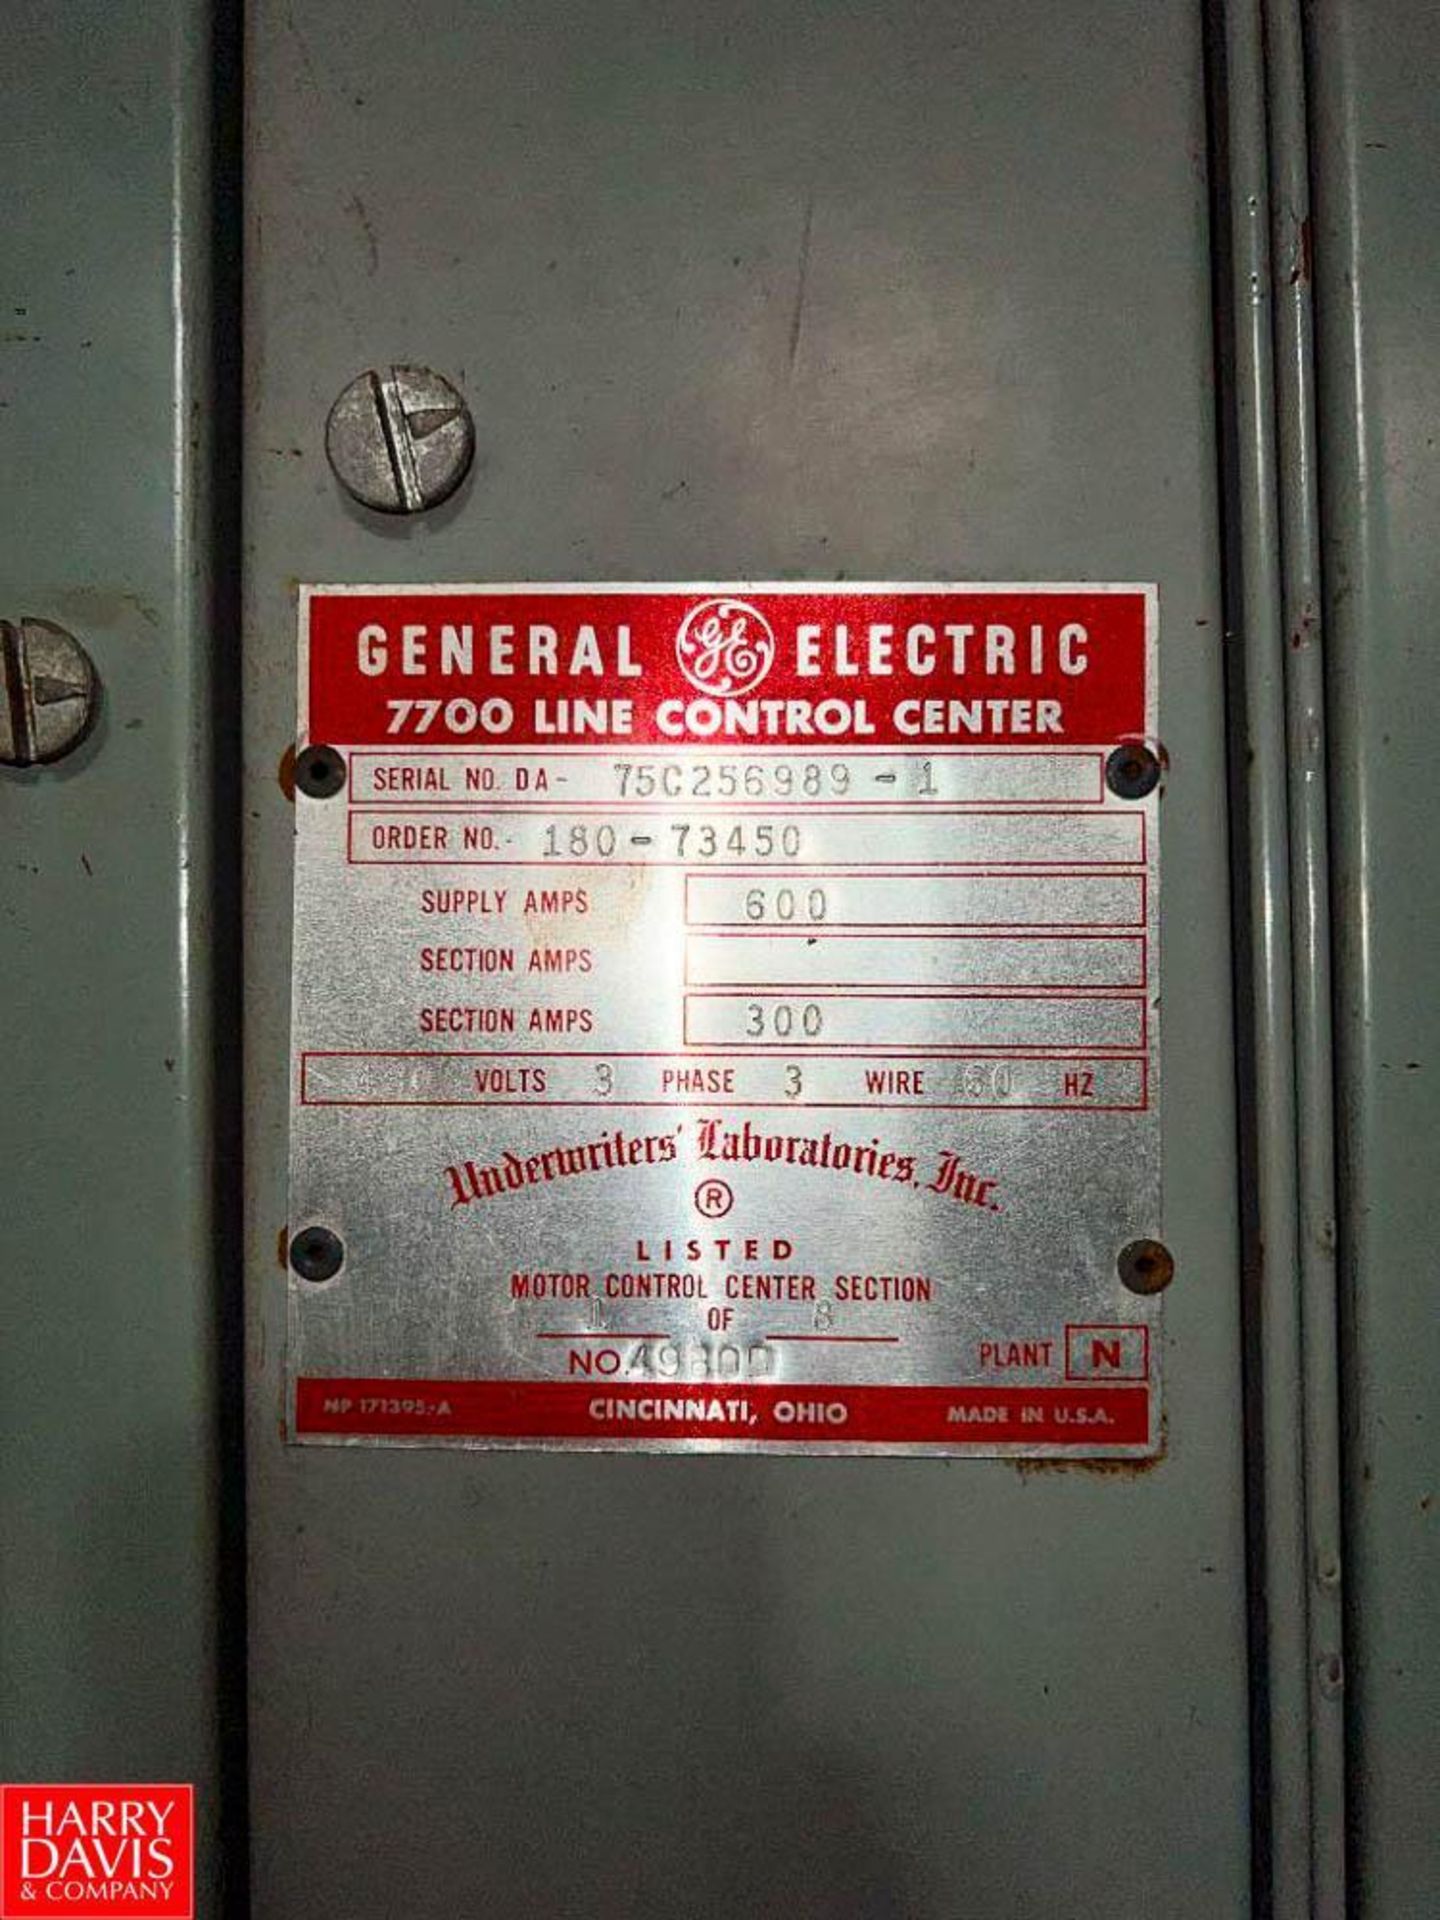 General Electric 7700 Line Control Center with (40) Disconnects, 600 Supply Amps and 300 Section Amp - Image 2 of 9